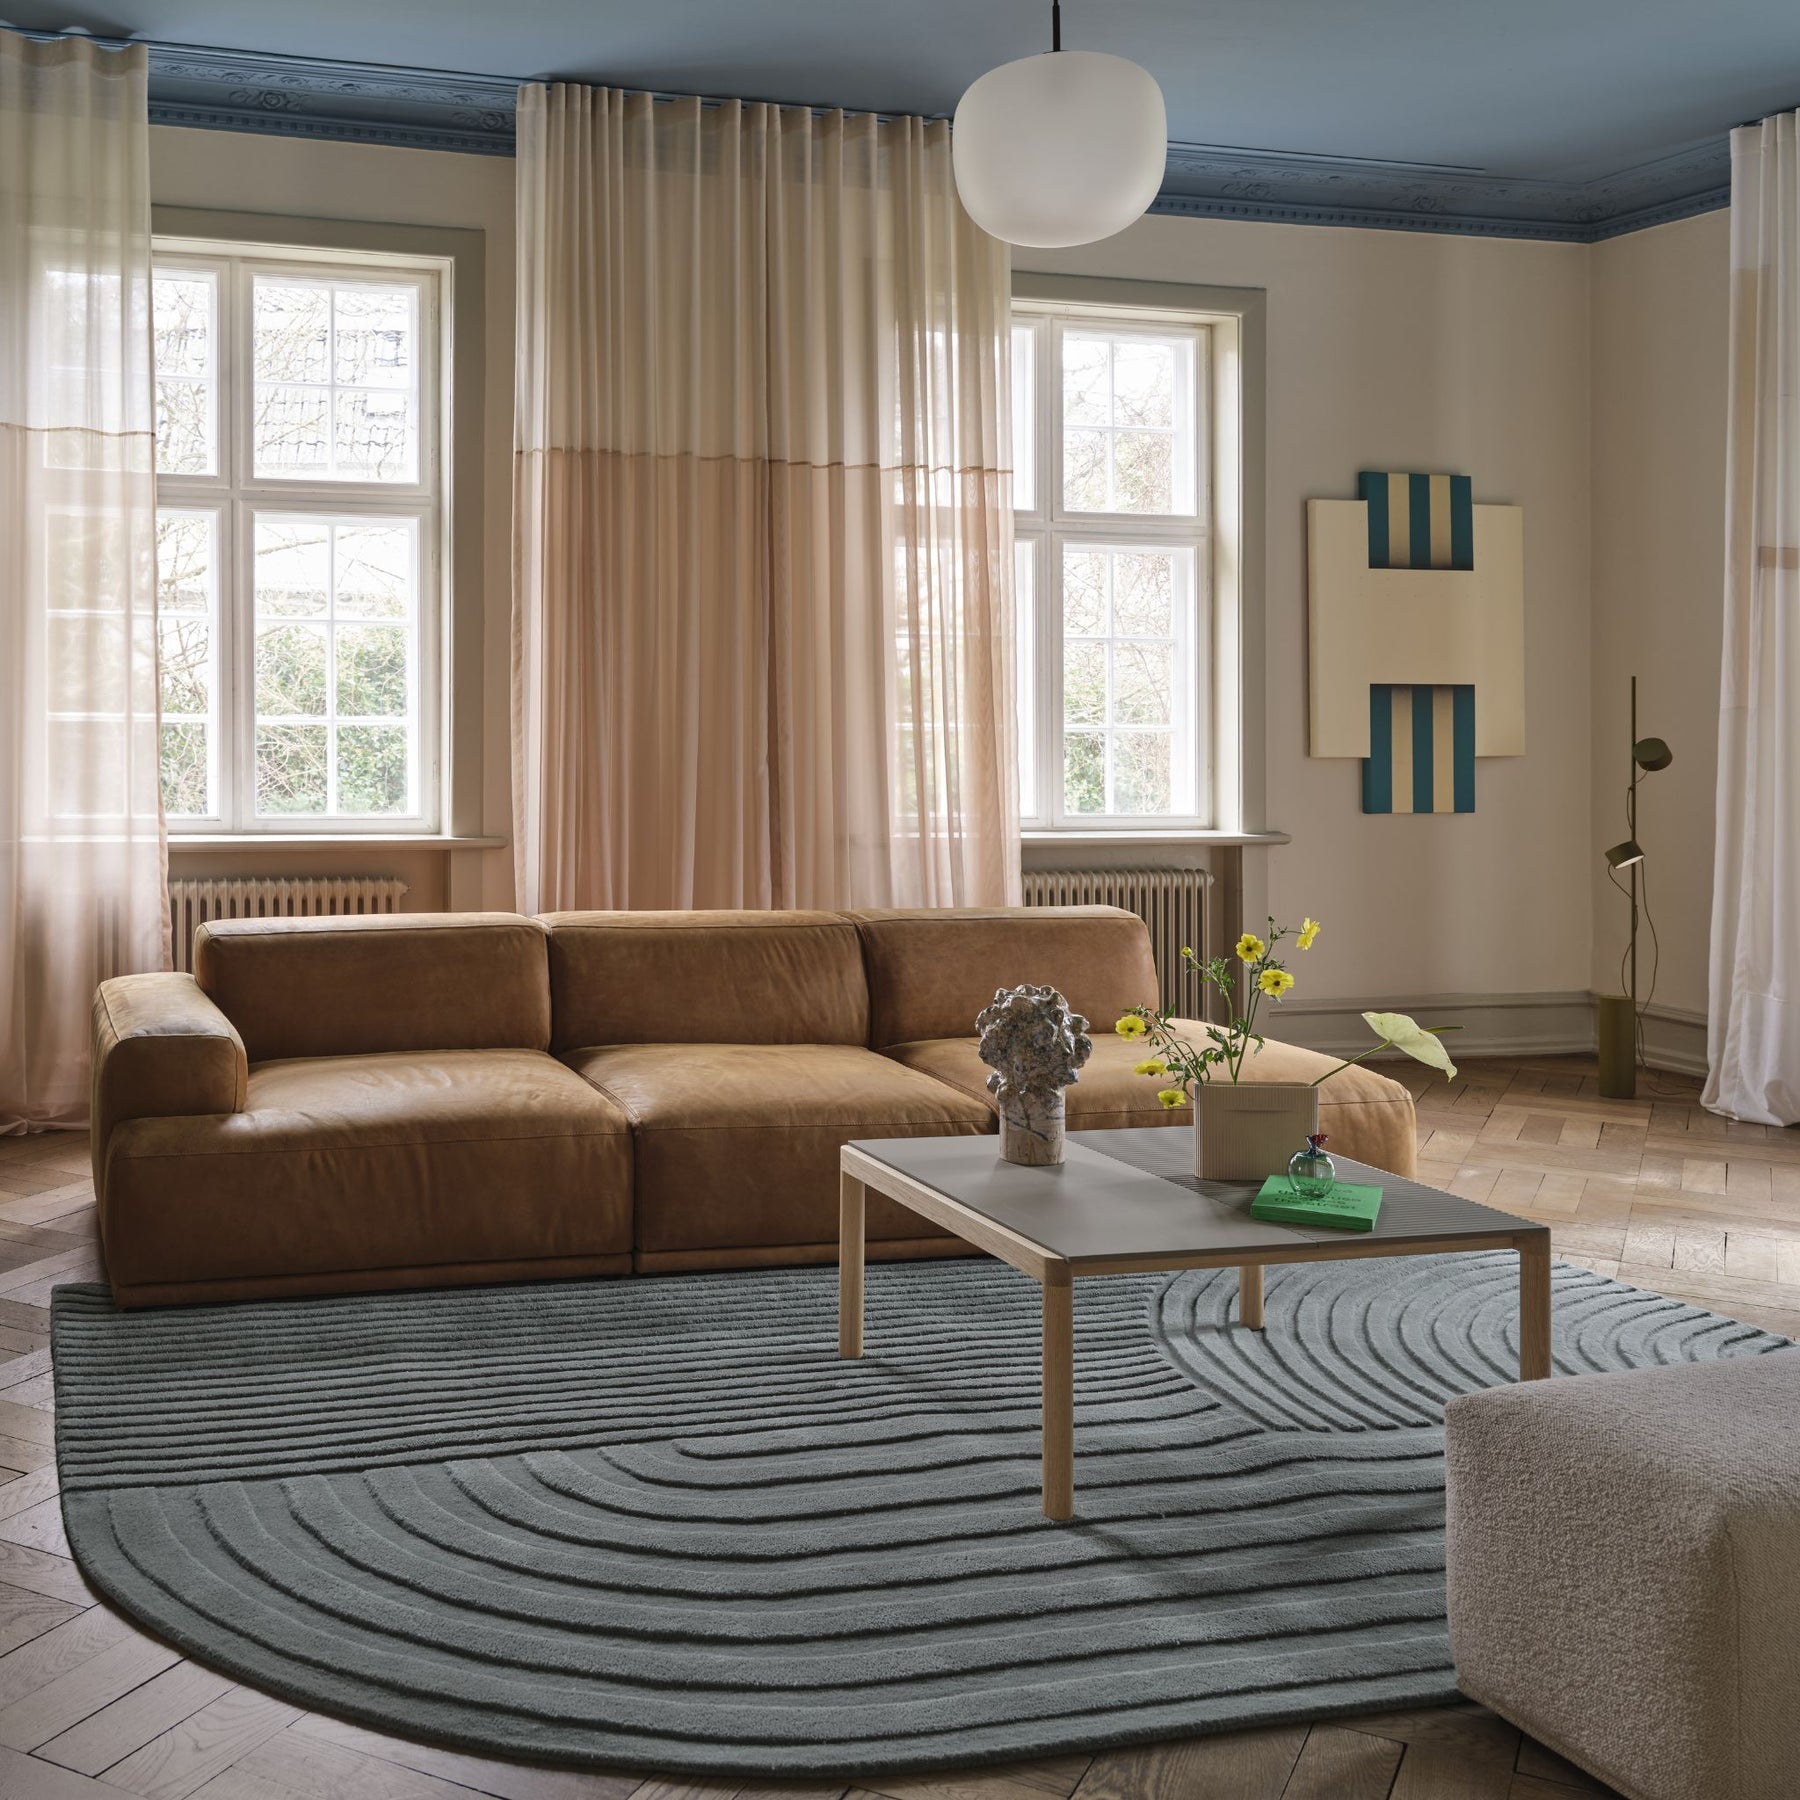 Muuto Relevo Rug Sage Green in Living Room with Connect Soft Sofa in Leather adn Rime Pendant Light